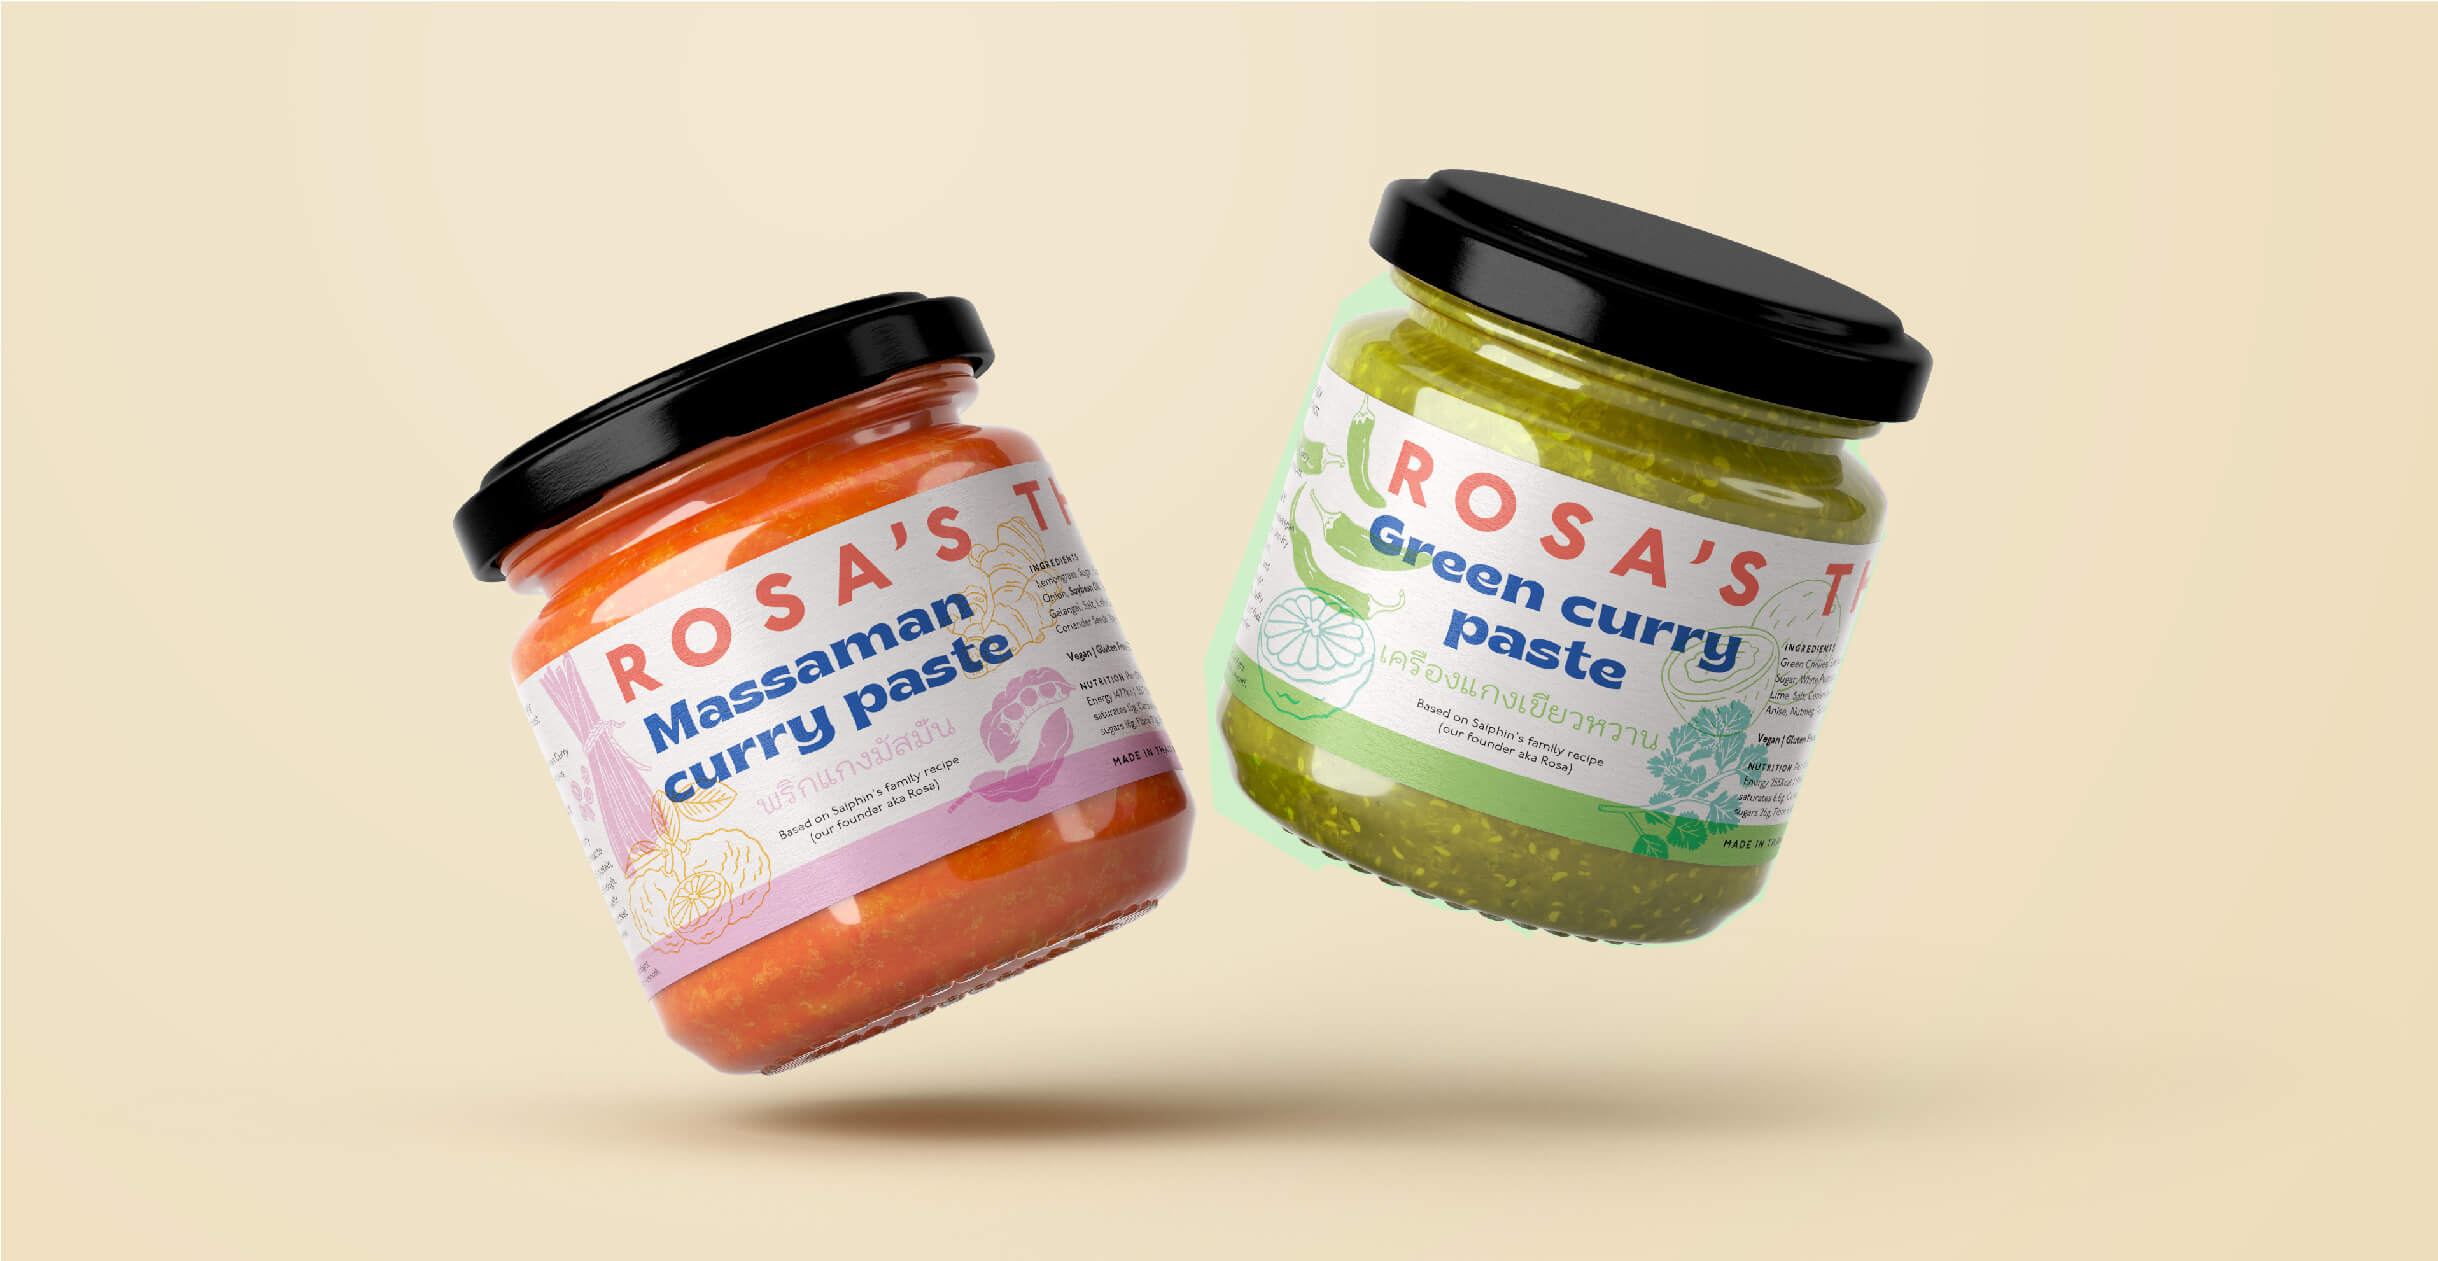 Rosa's Thai packaging curry pastes and sauces